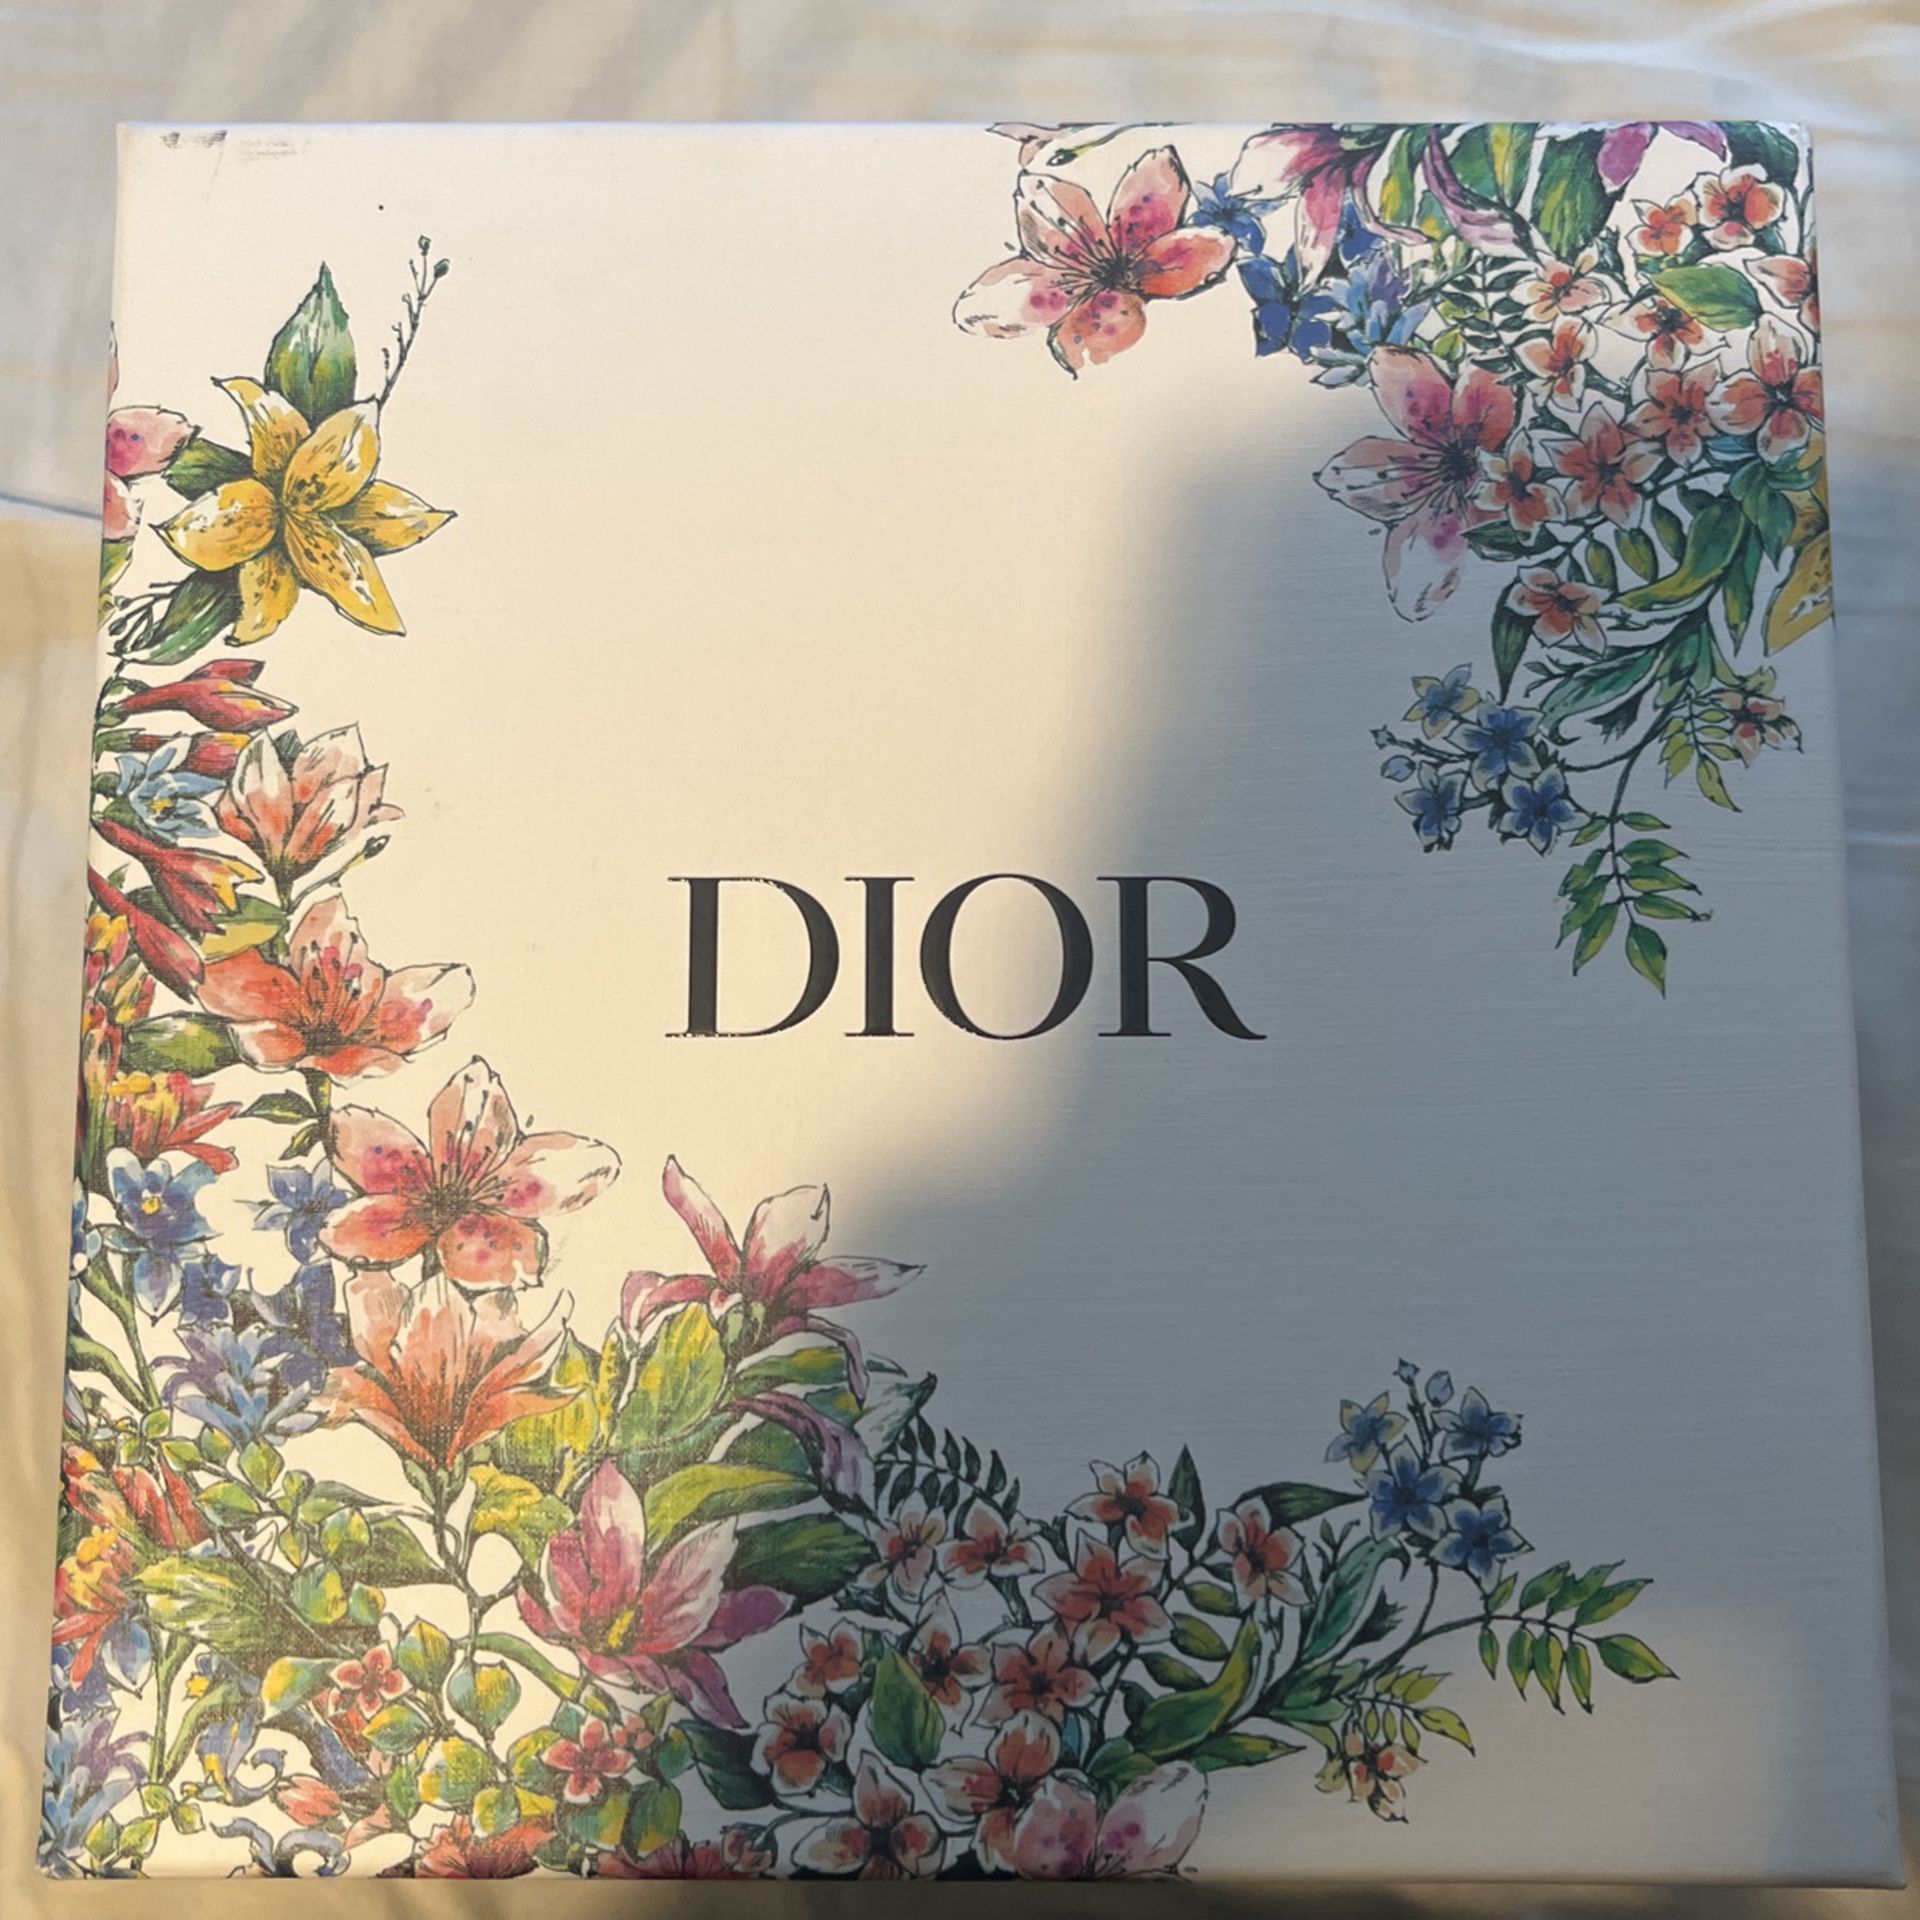 Dior Perfume For Women’s 